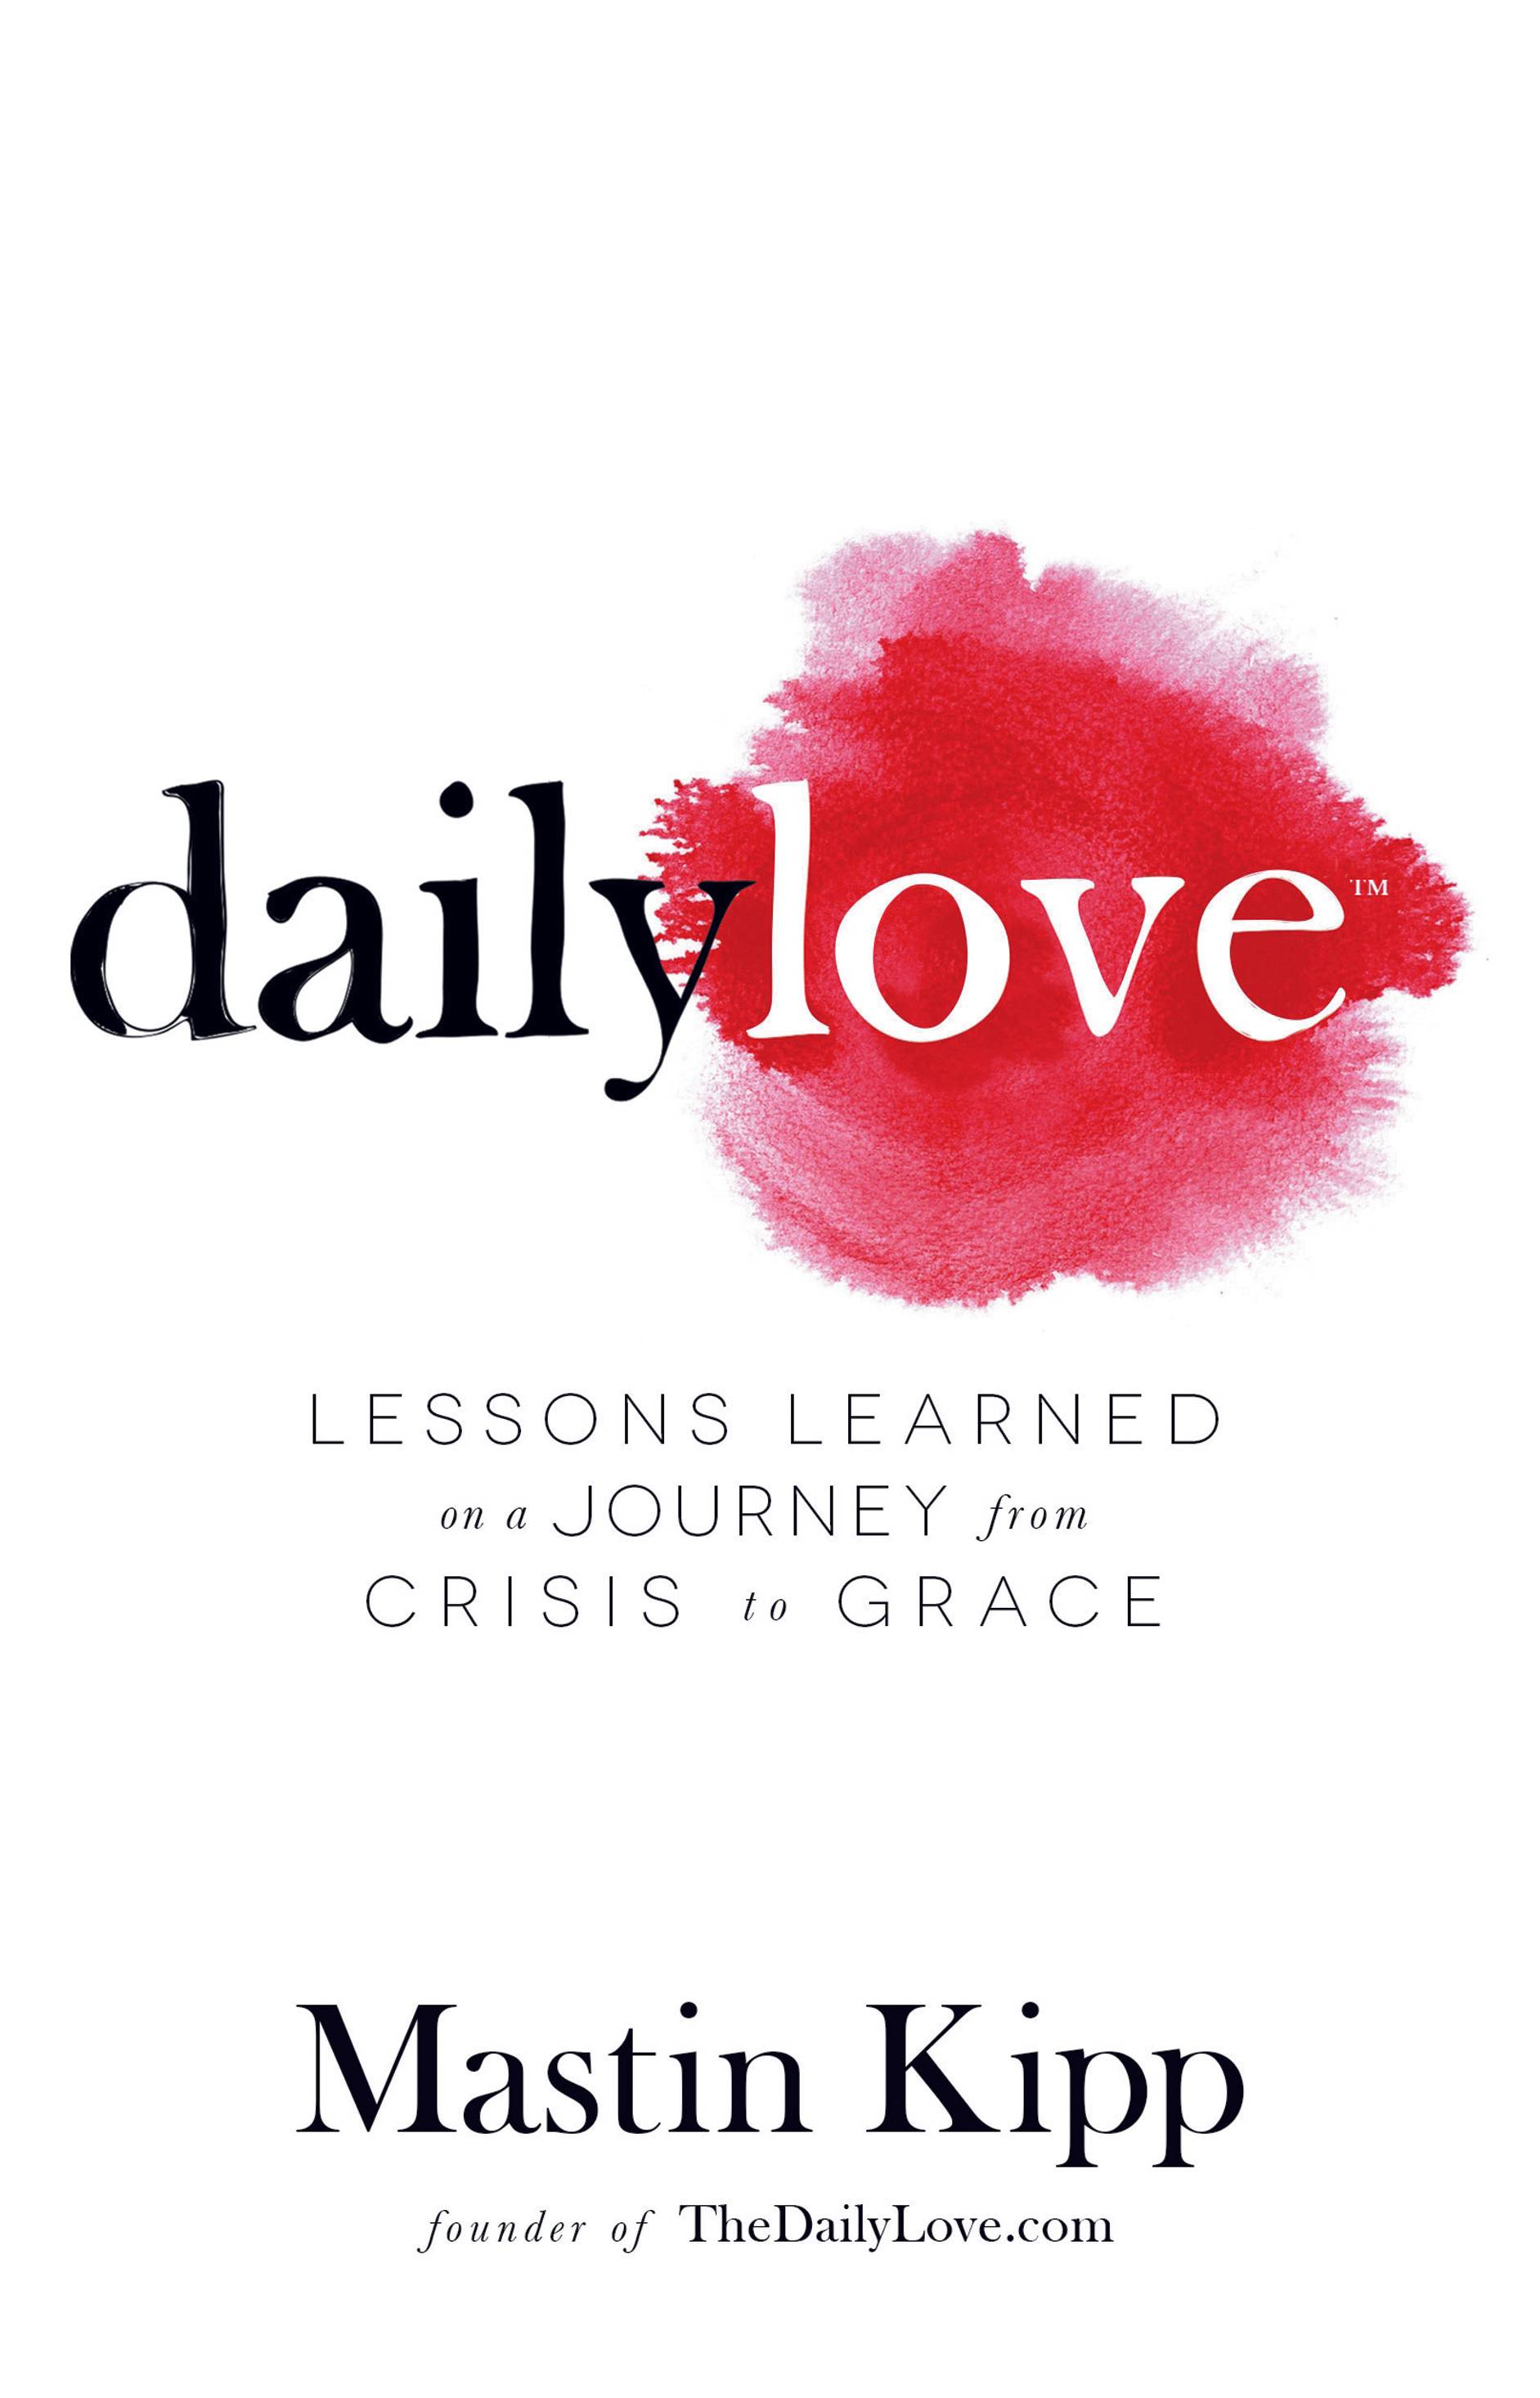 Daily love - growing into grace